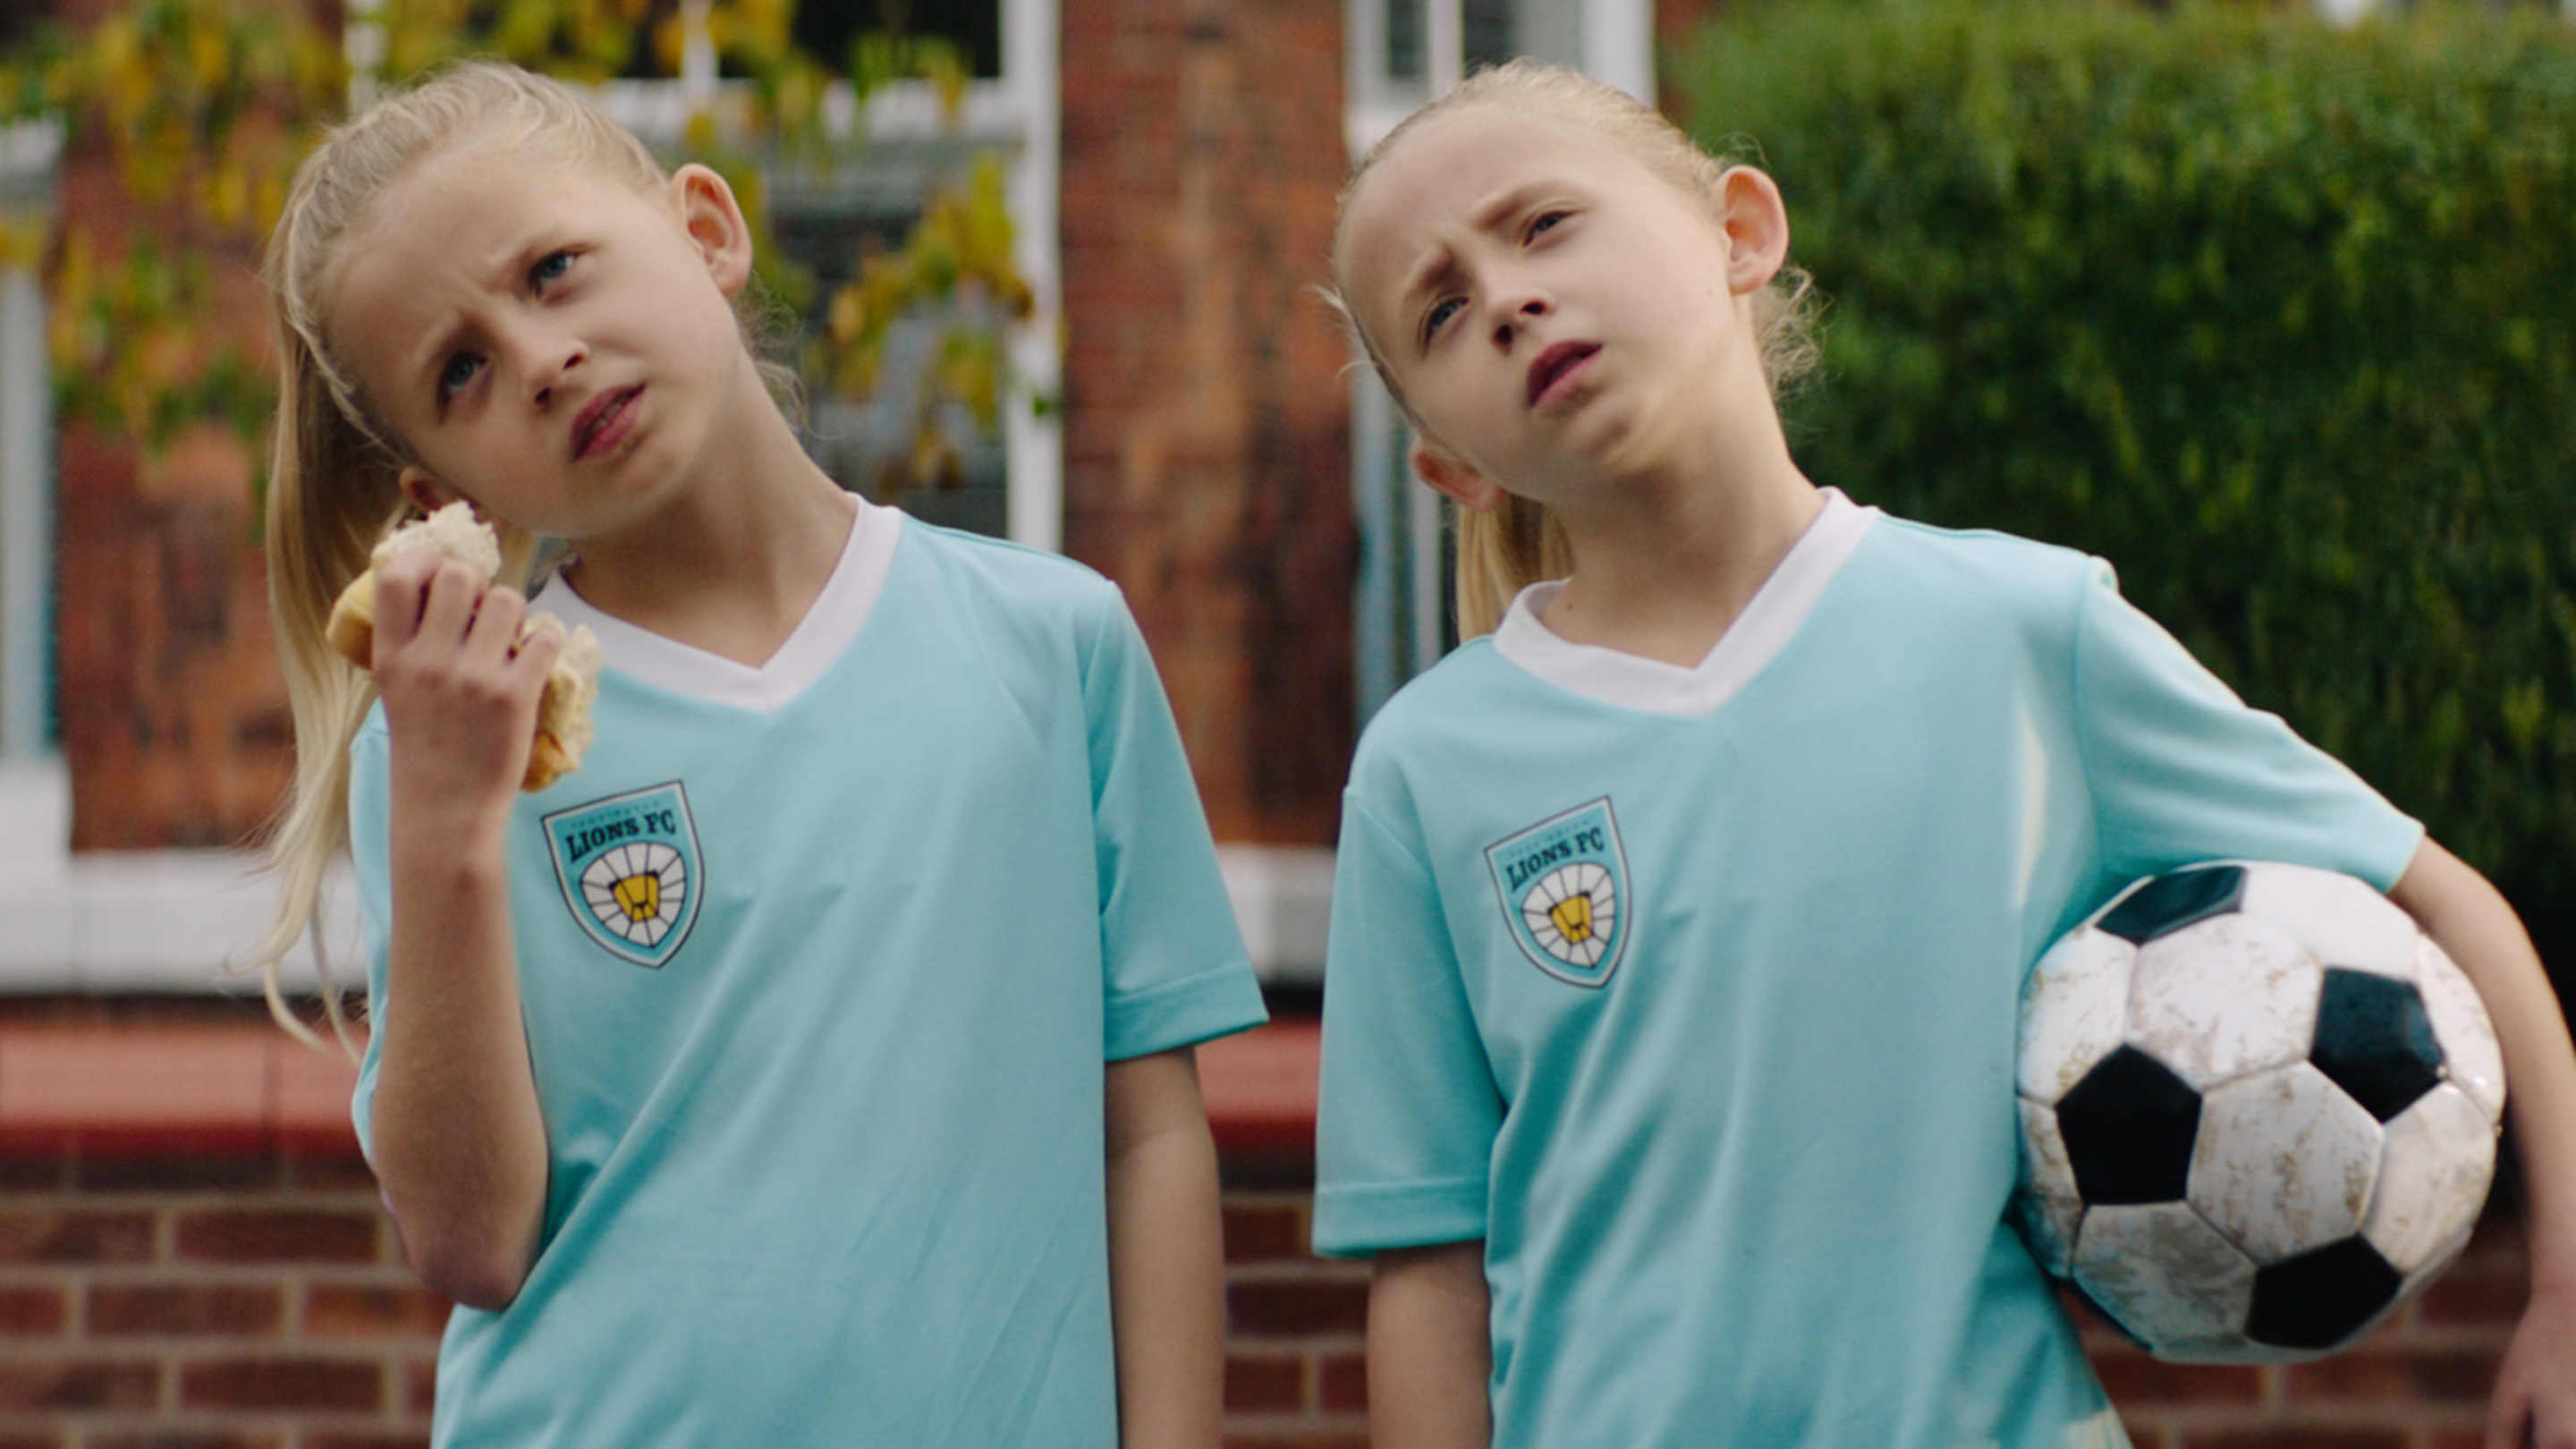 Pair of twins in football kit, both tilting their heads and looking confused